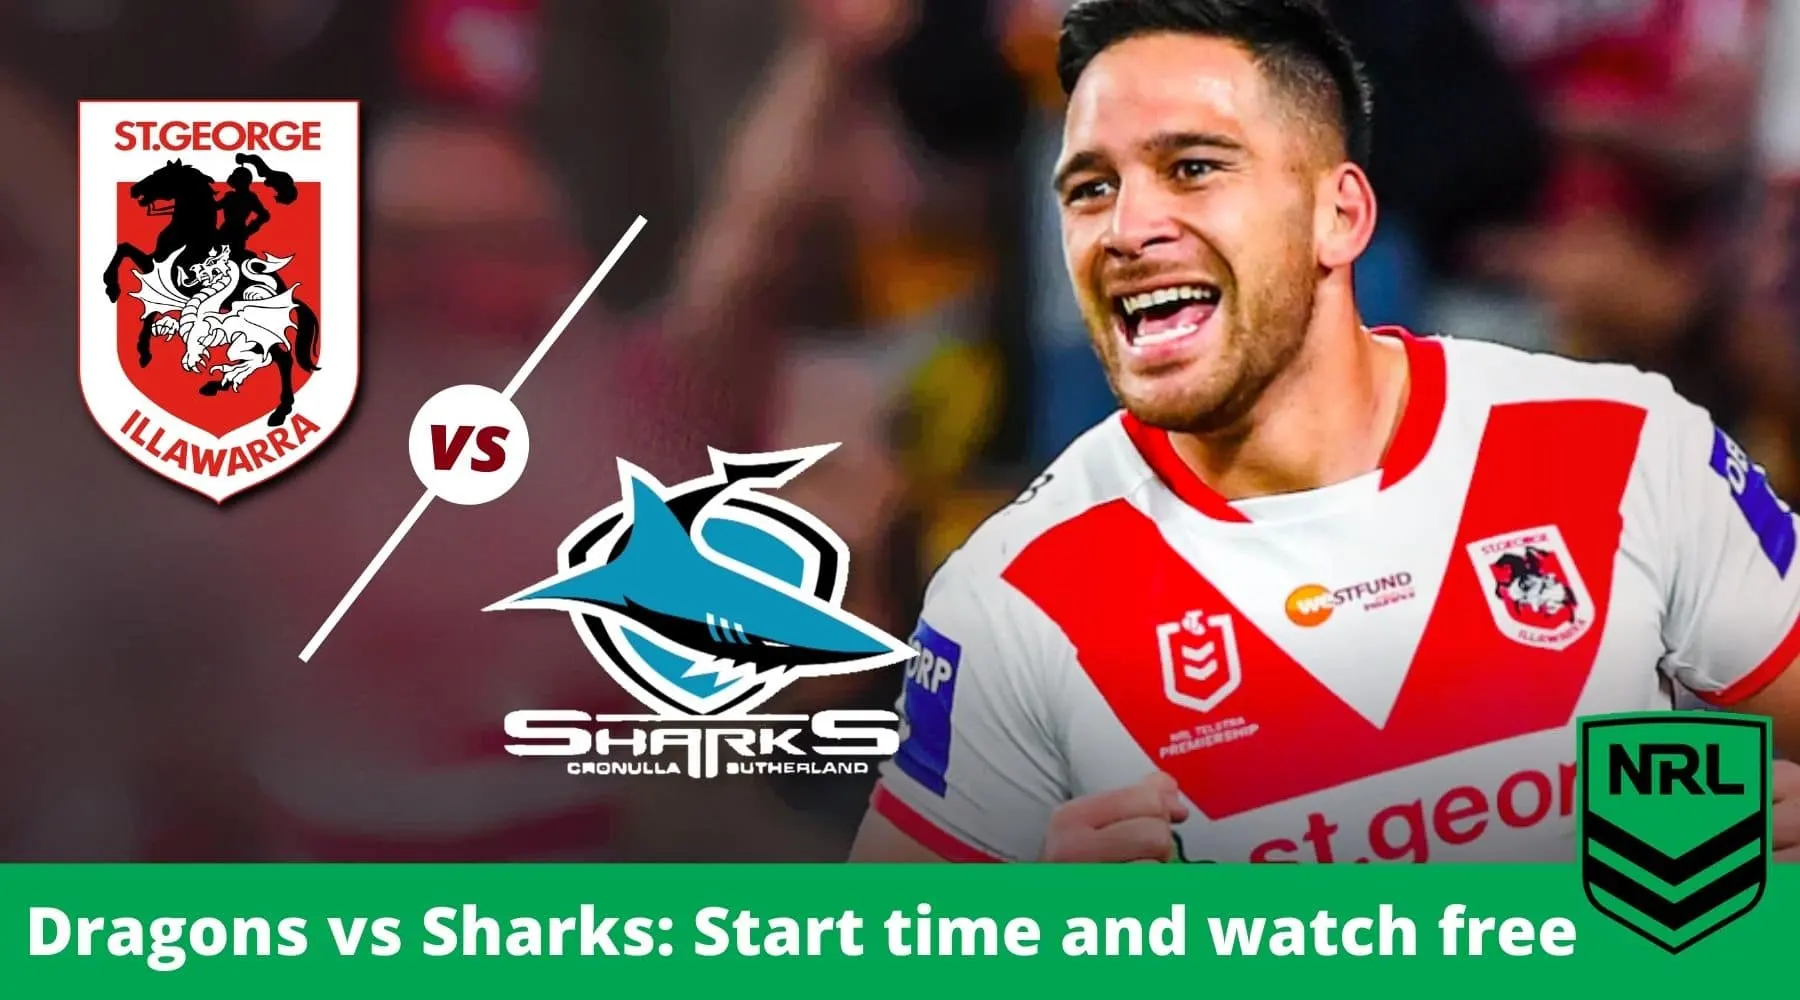 How to watch Dragons vs Sharks NRL 2021 live and free